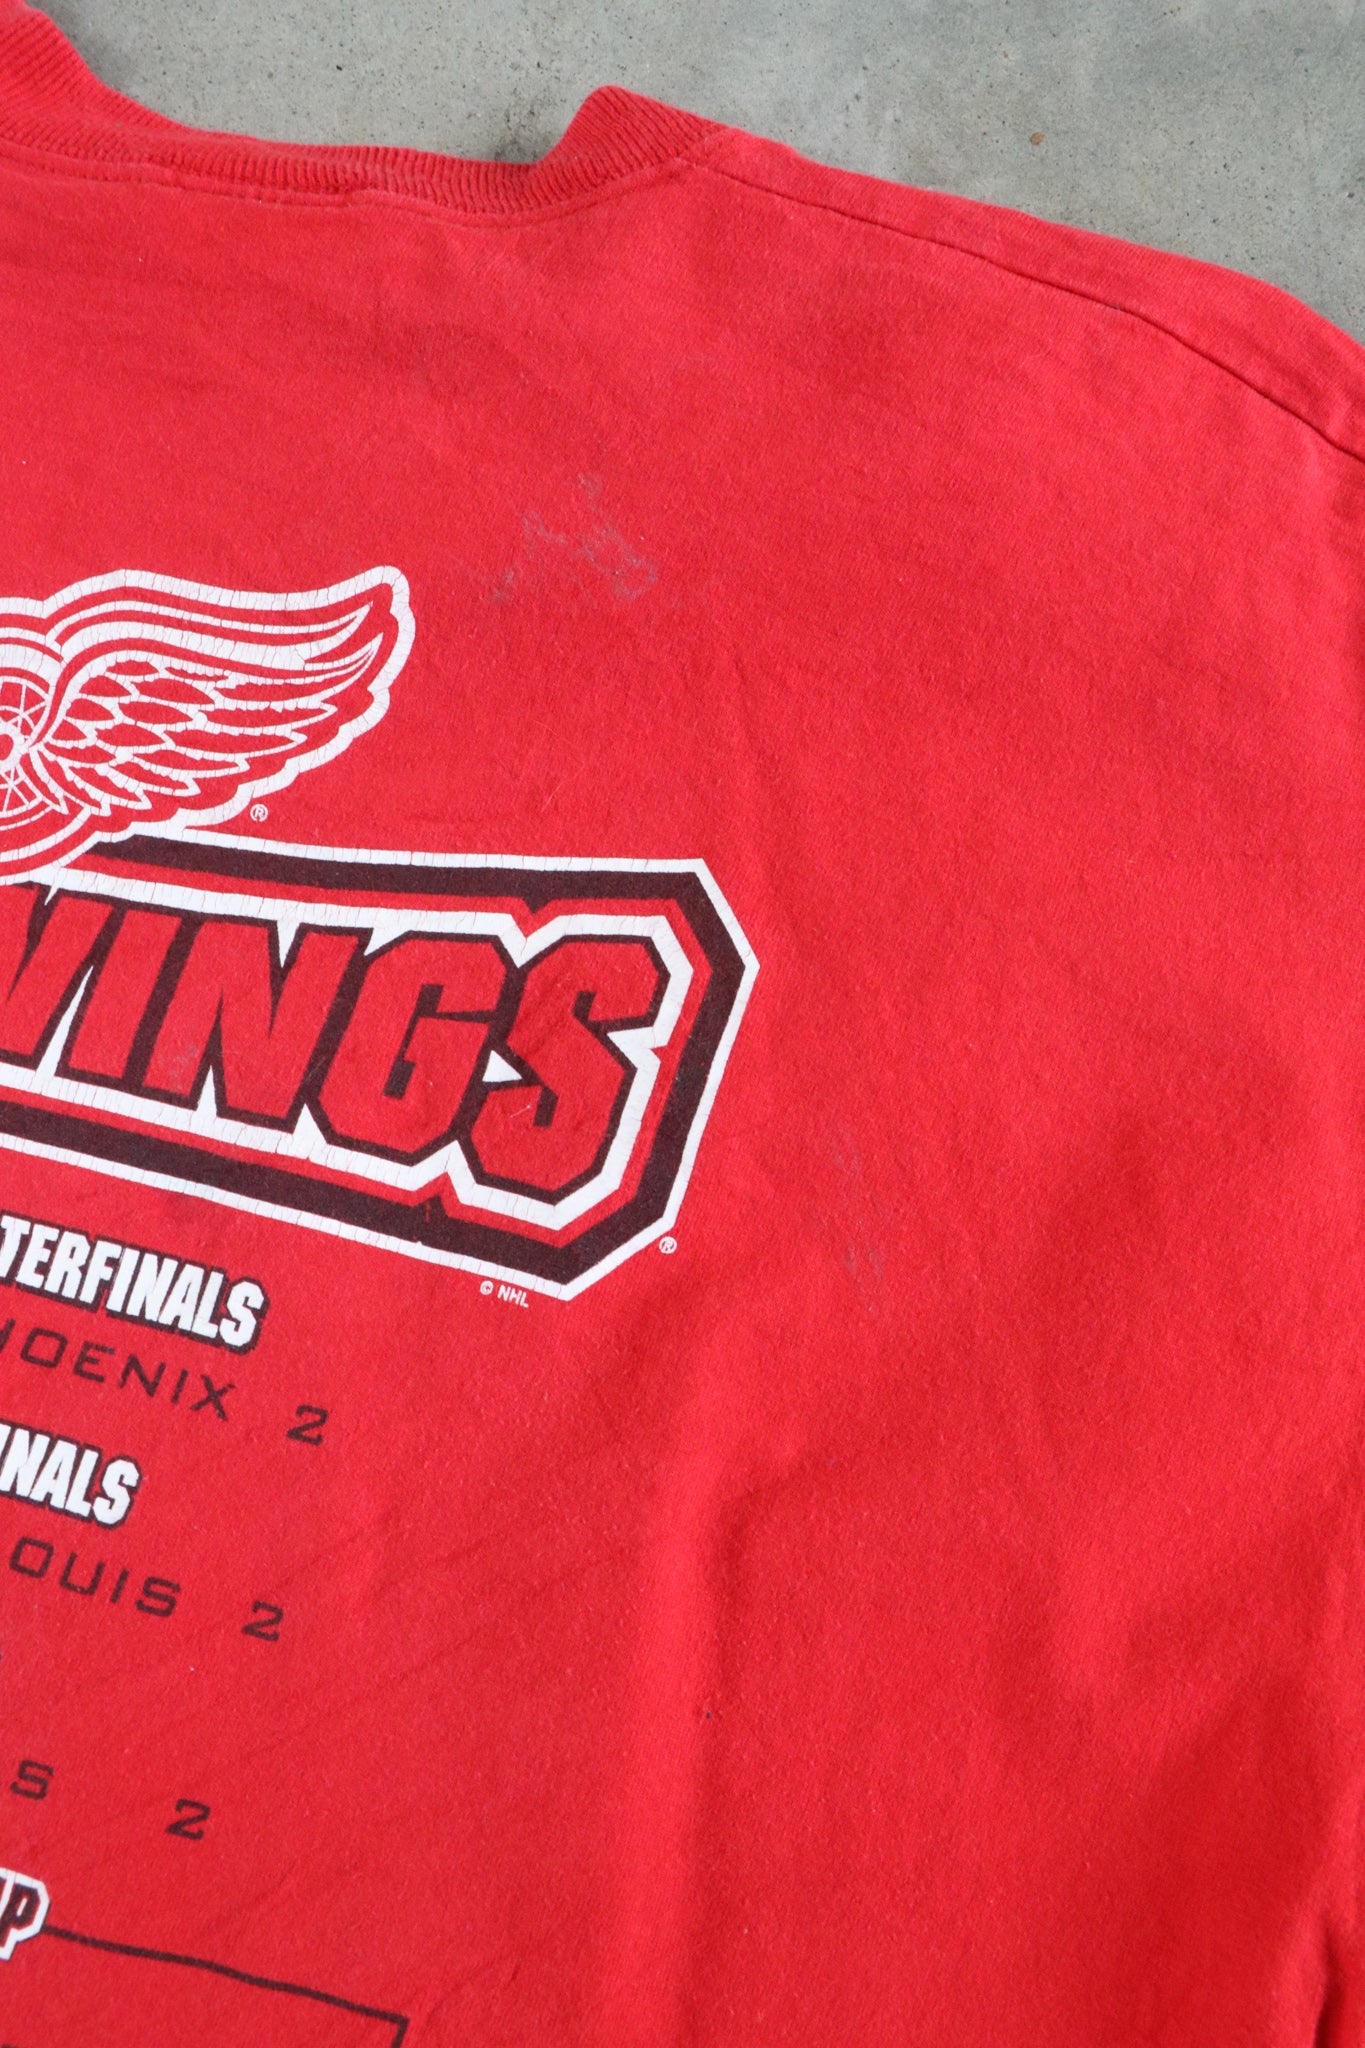 Vintage 1998 NHL Detroit Red Wings Champions Tee XL